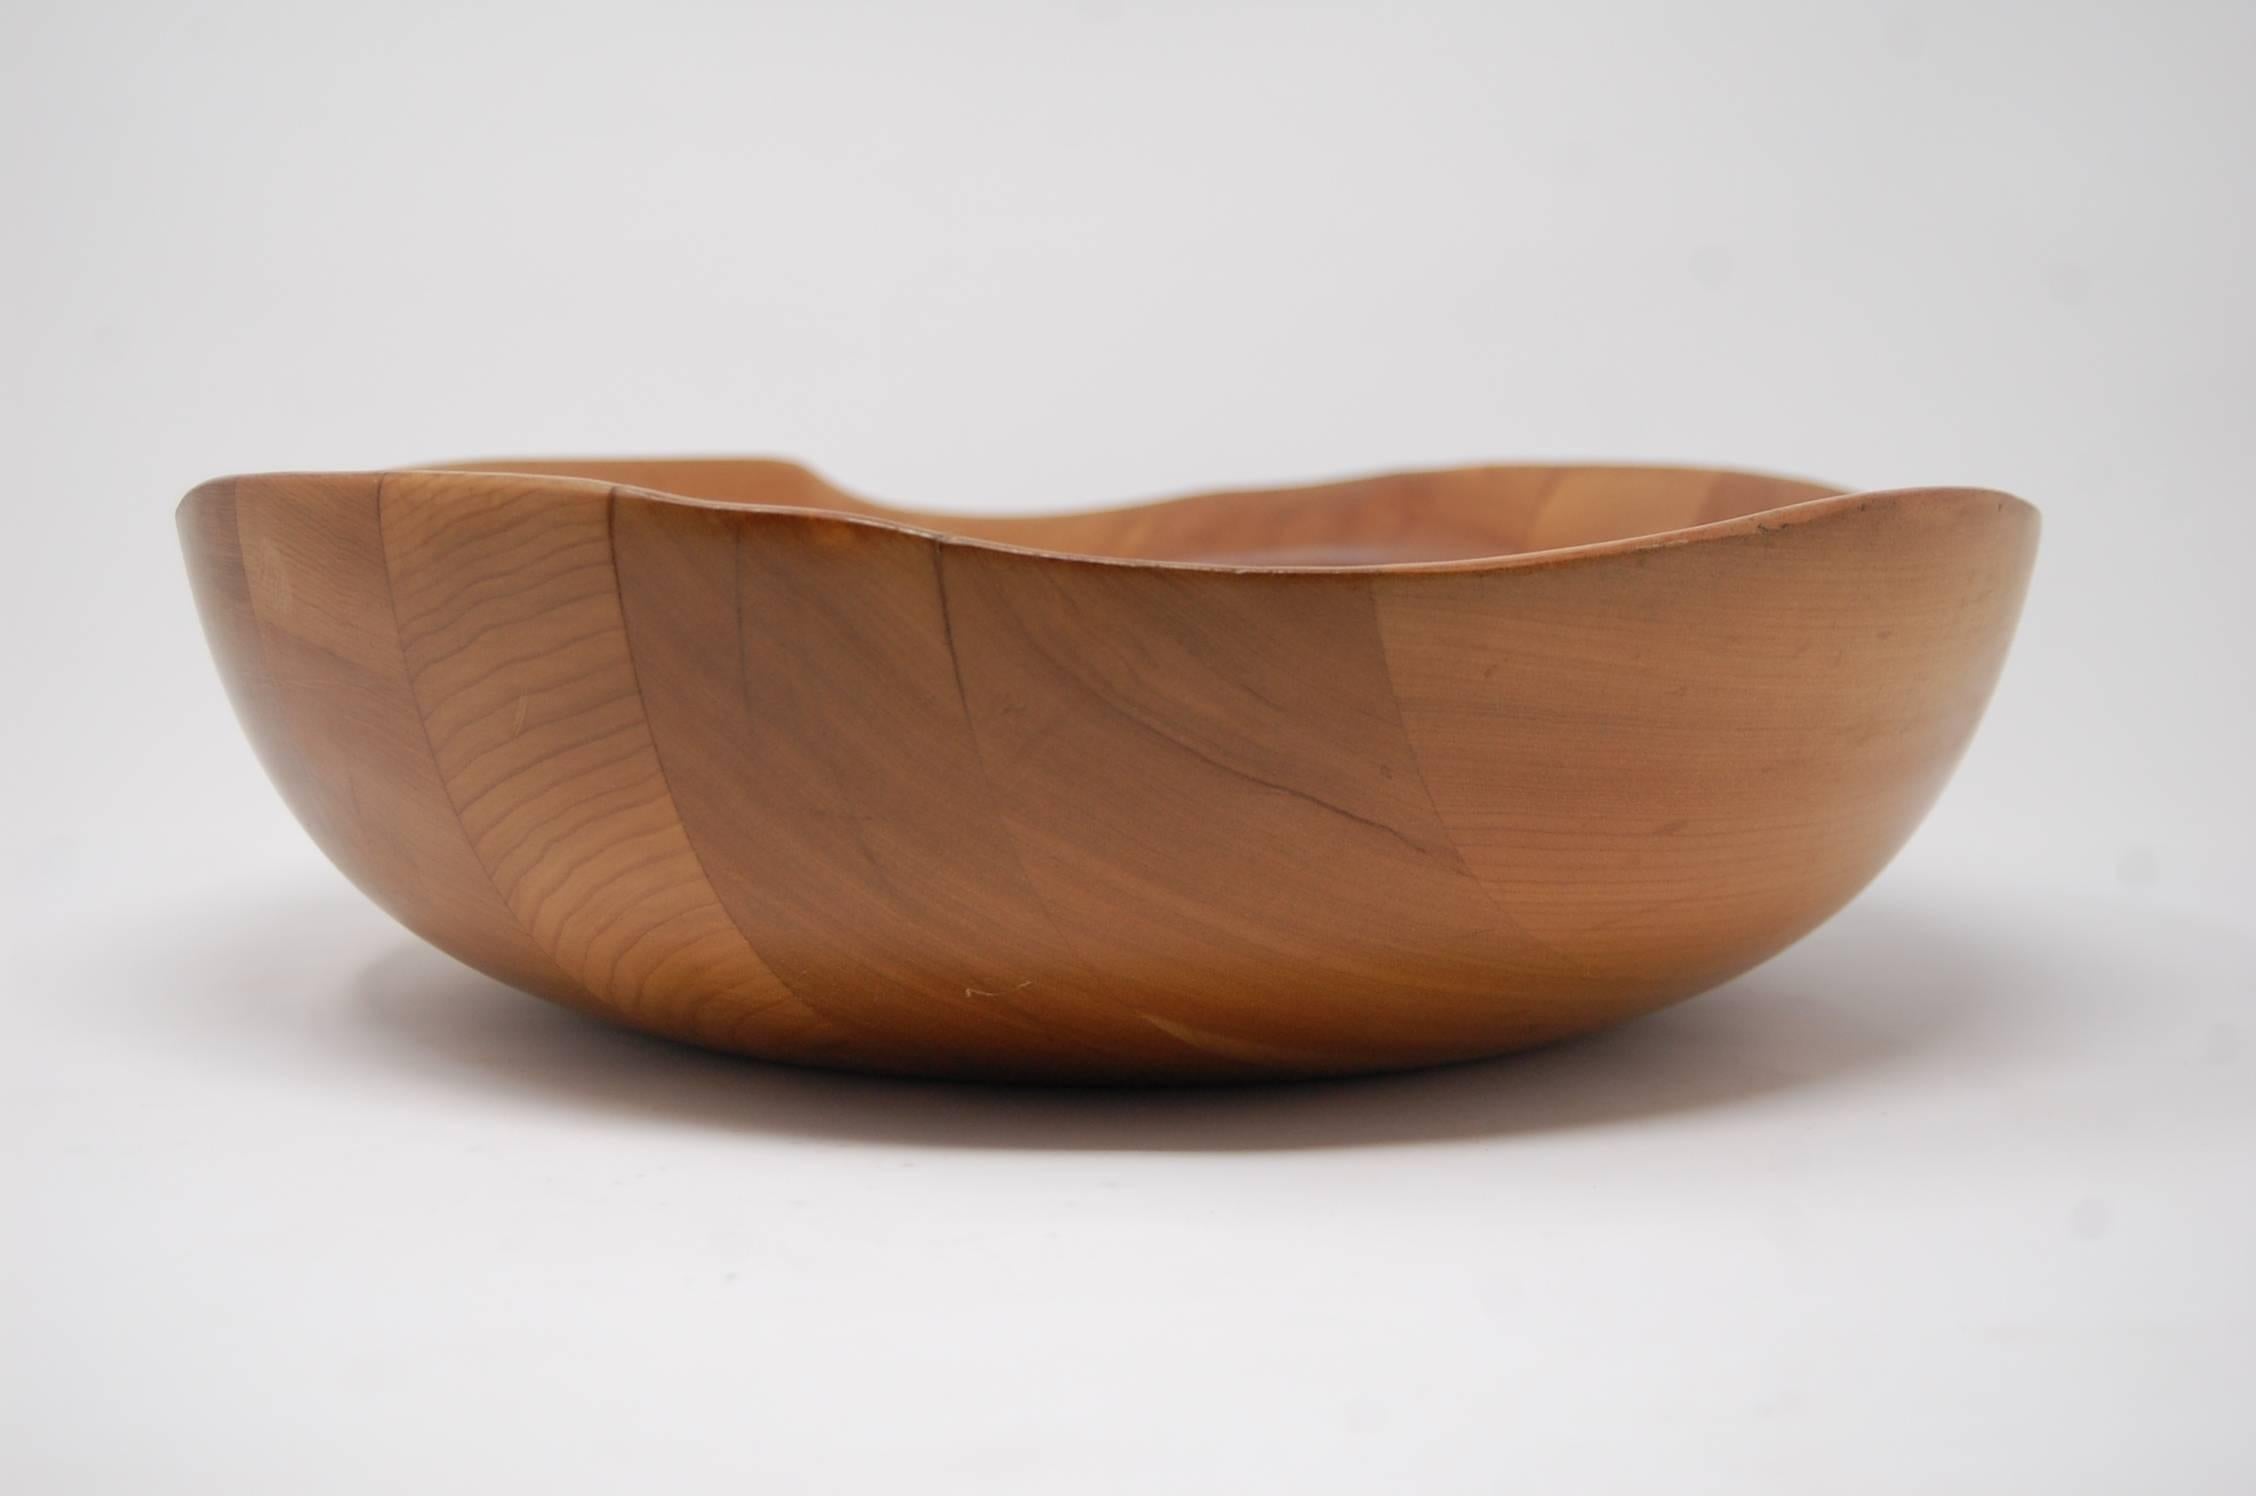 Oceana series wood bowl designed by Mary and Russel Wright, circa 1940s, and made by Klise. Bowl has been professionally refinished. Measures: 13